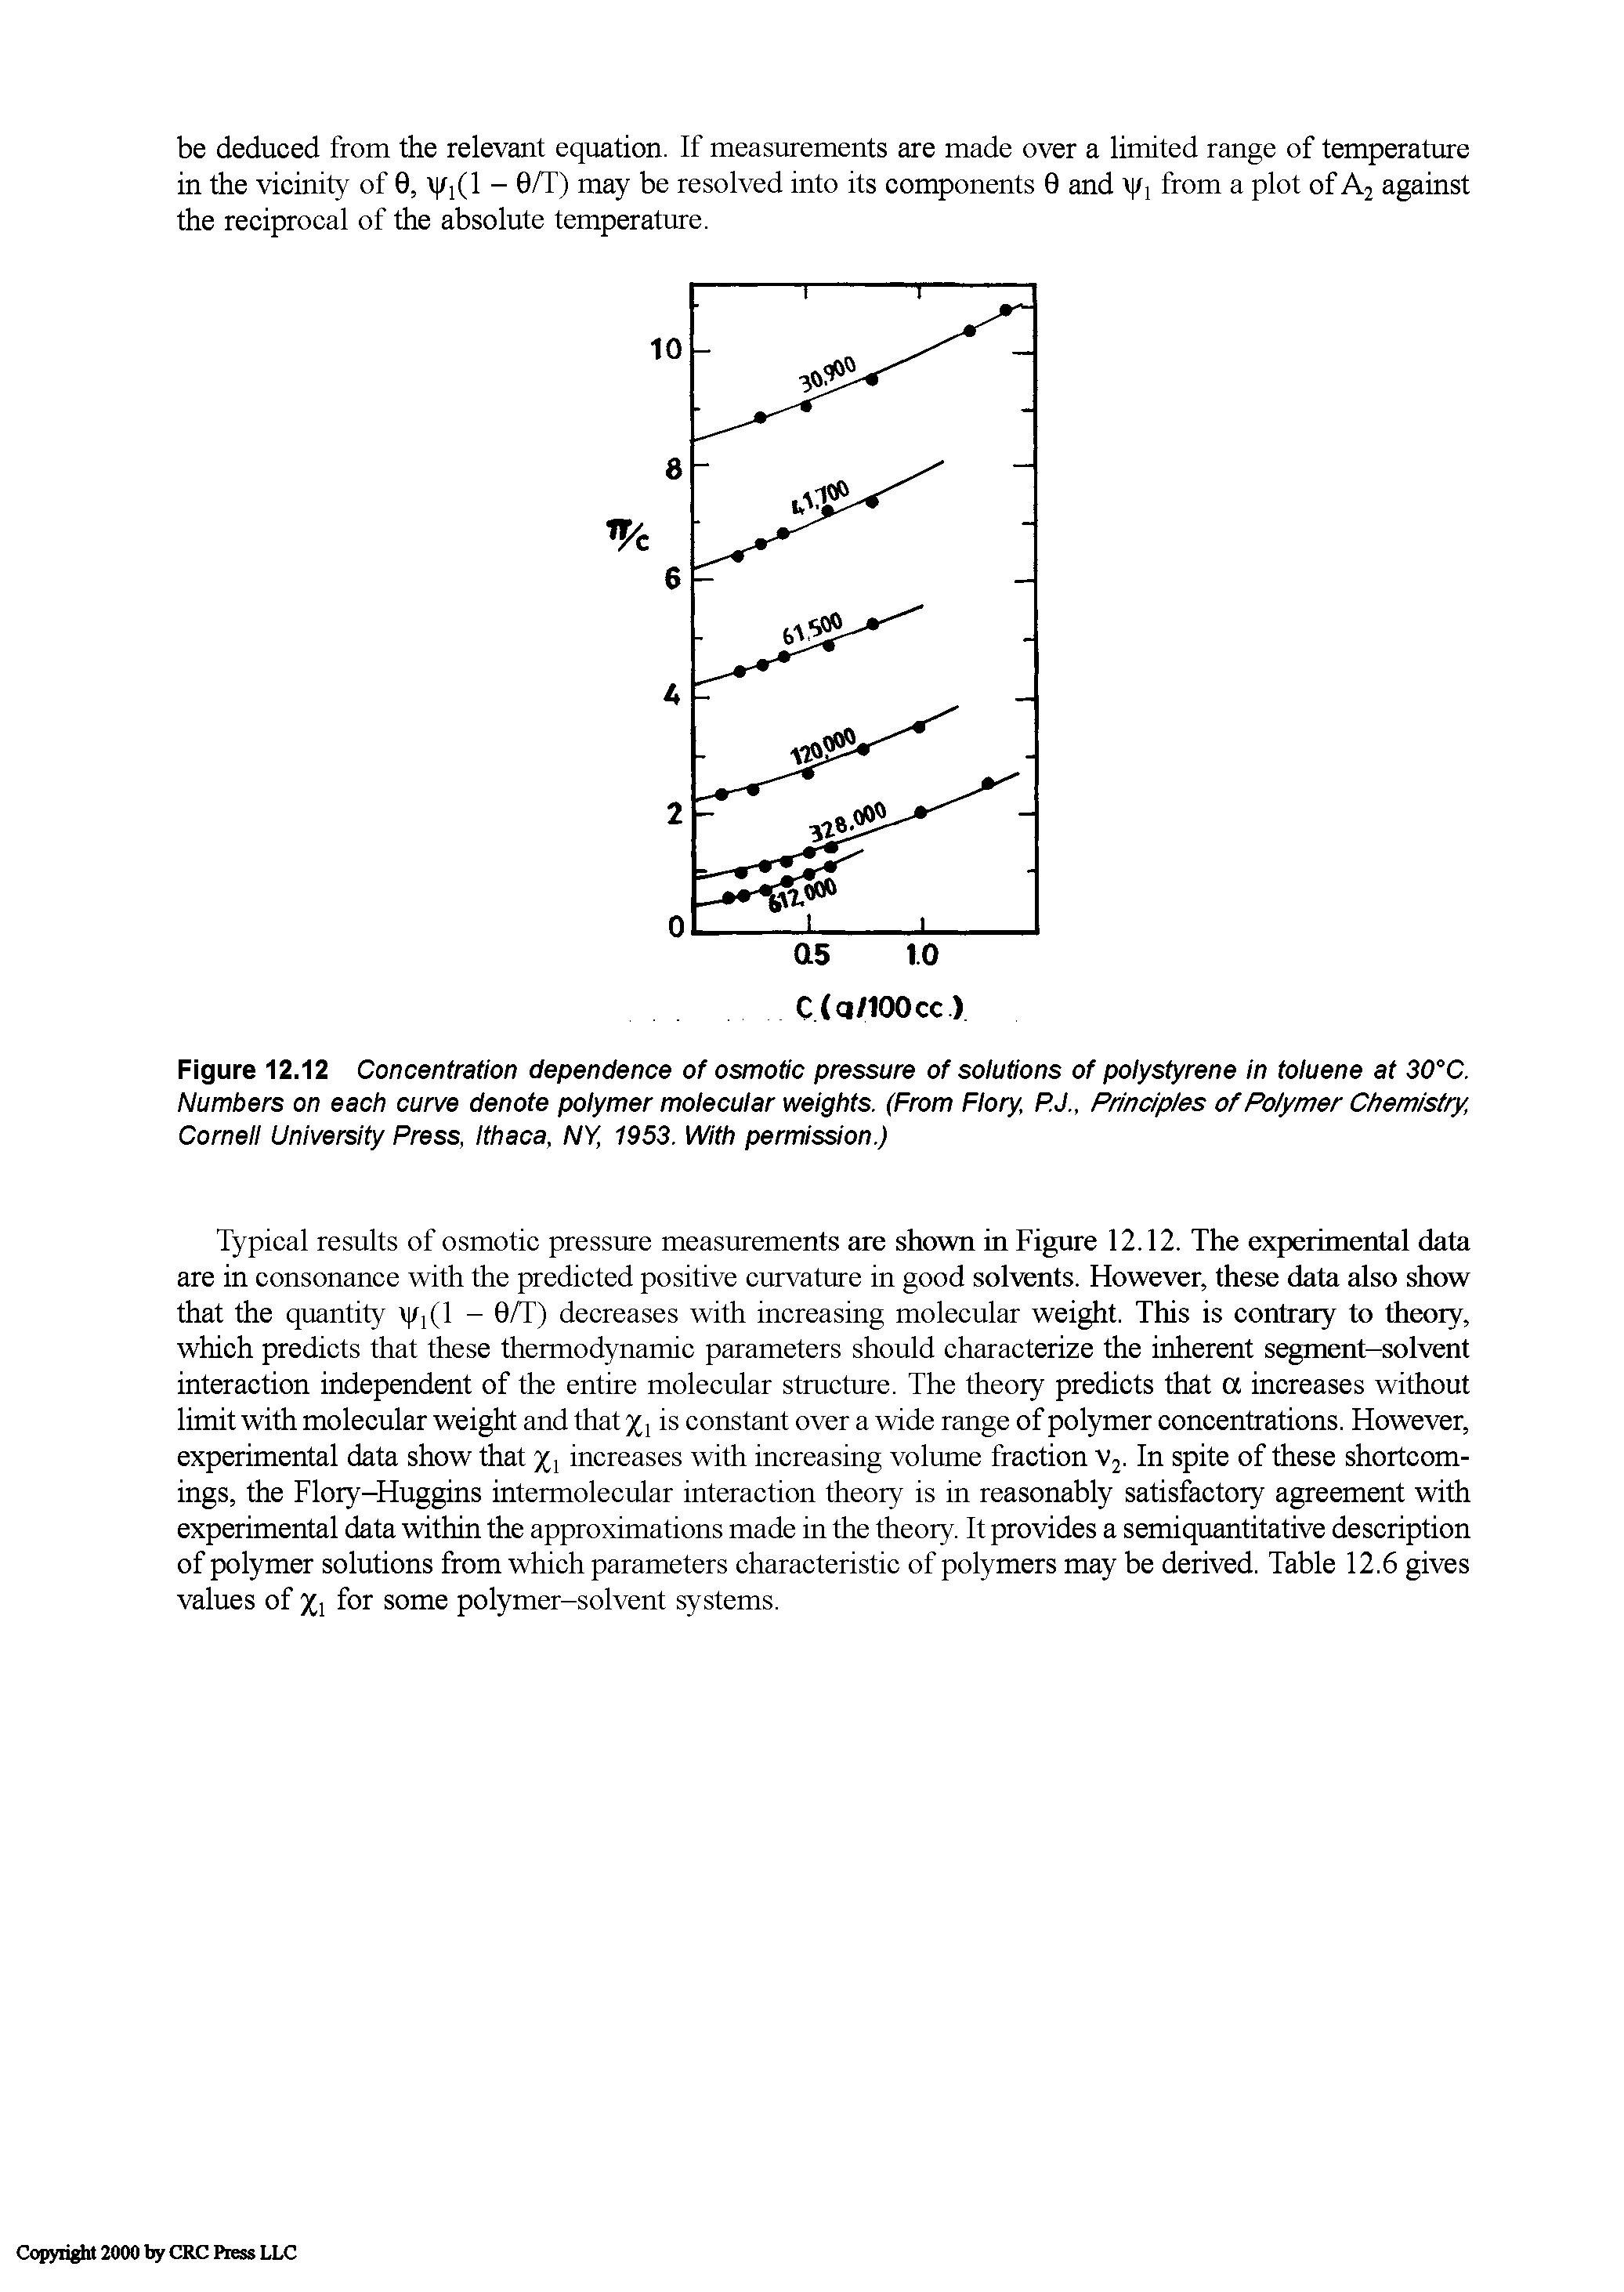 Figure 12.12 Concentration dependence of osmotic pressure of solutions of polystyrene in toluene at 30°C. Numbers on each curve denote polymer molecular weights. (From Flory, P.J., Principles of Polymer Chemistry, Cornell University Press, Ithaca, NY, 1953. With periwsslon.)...